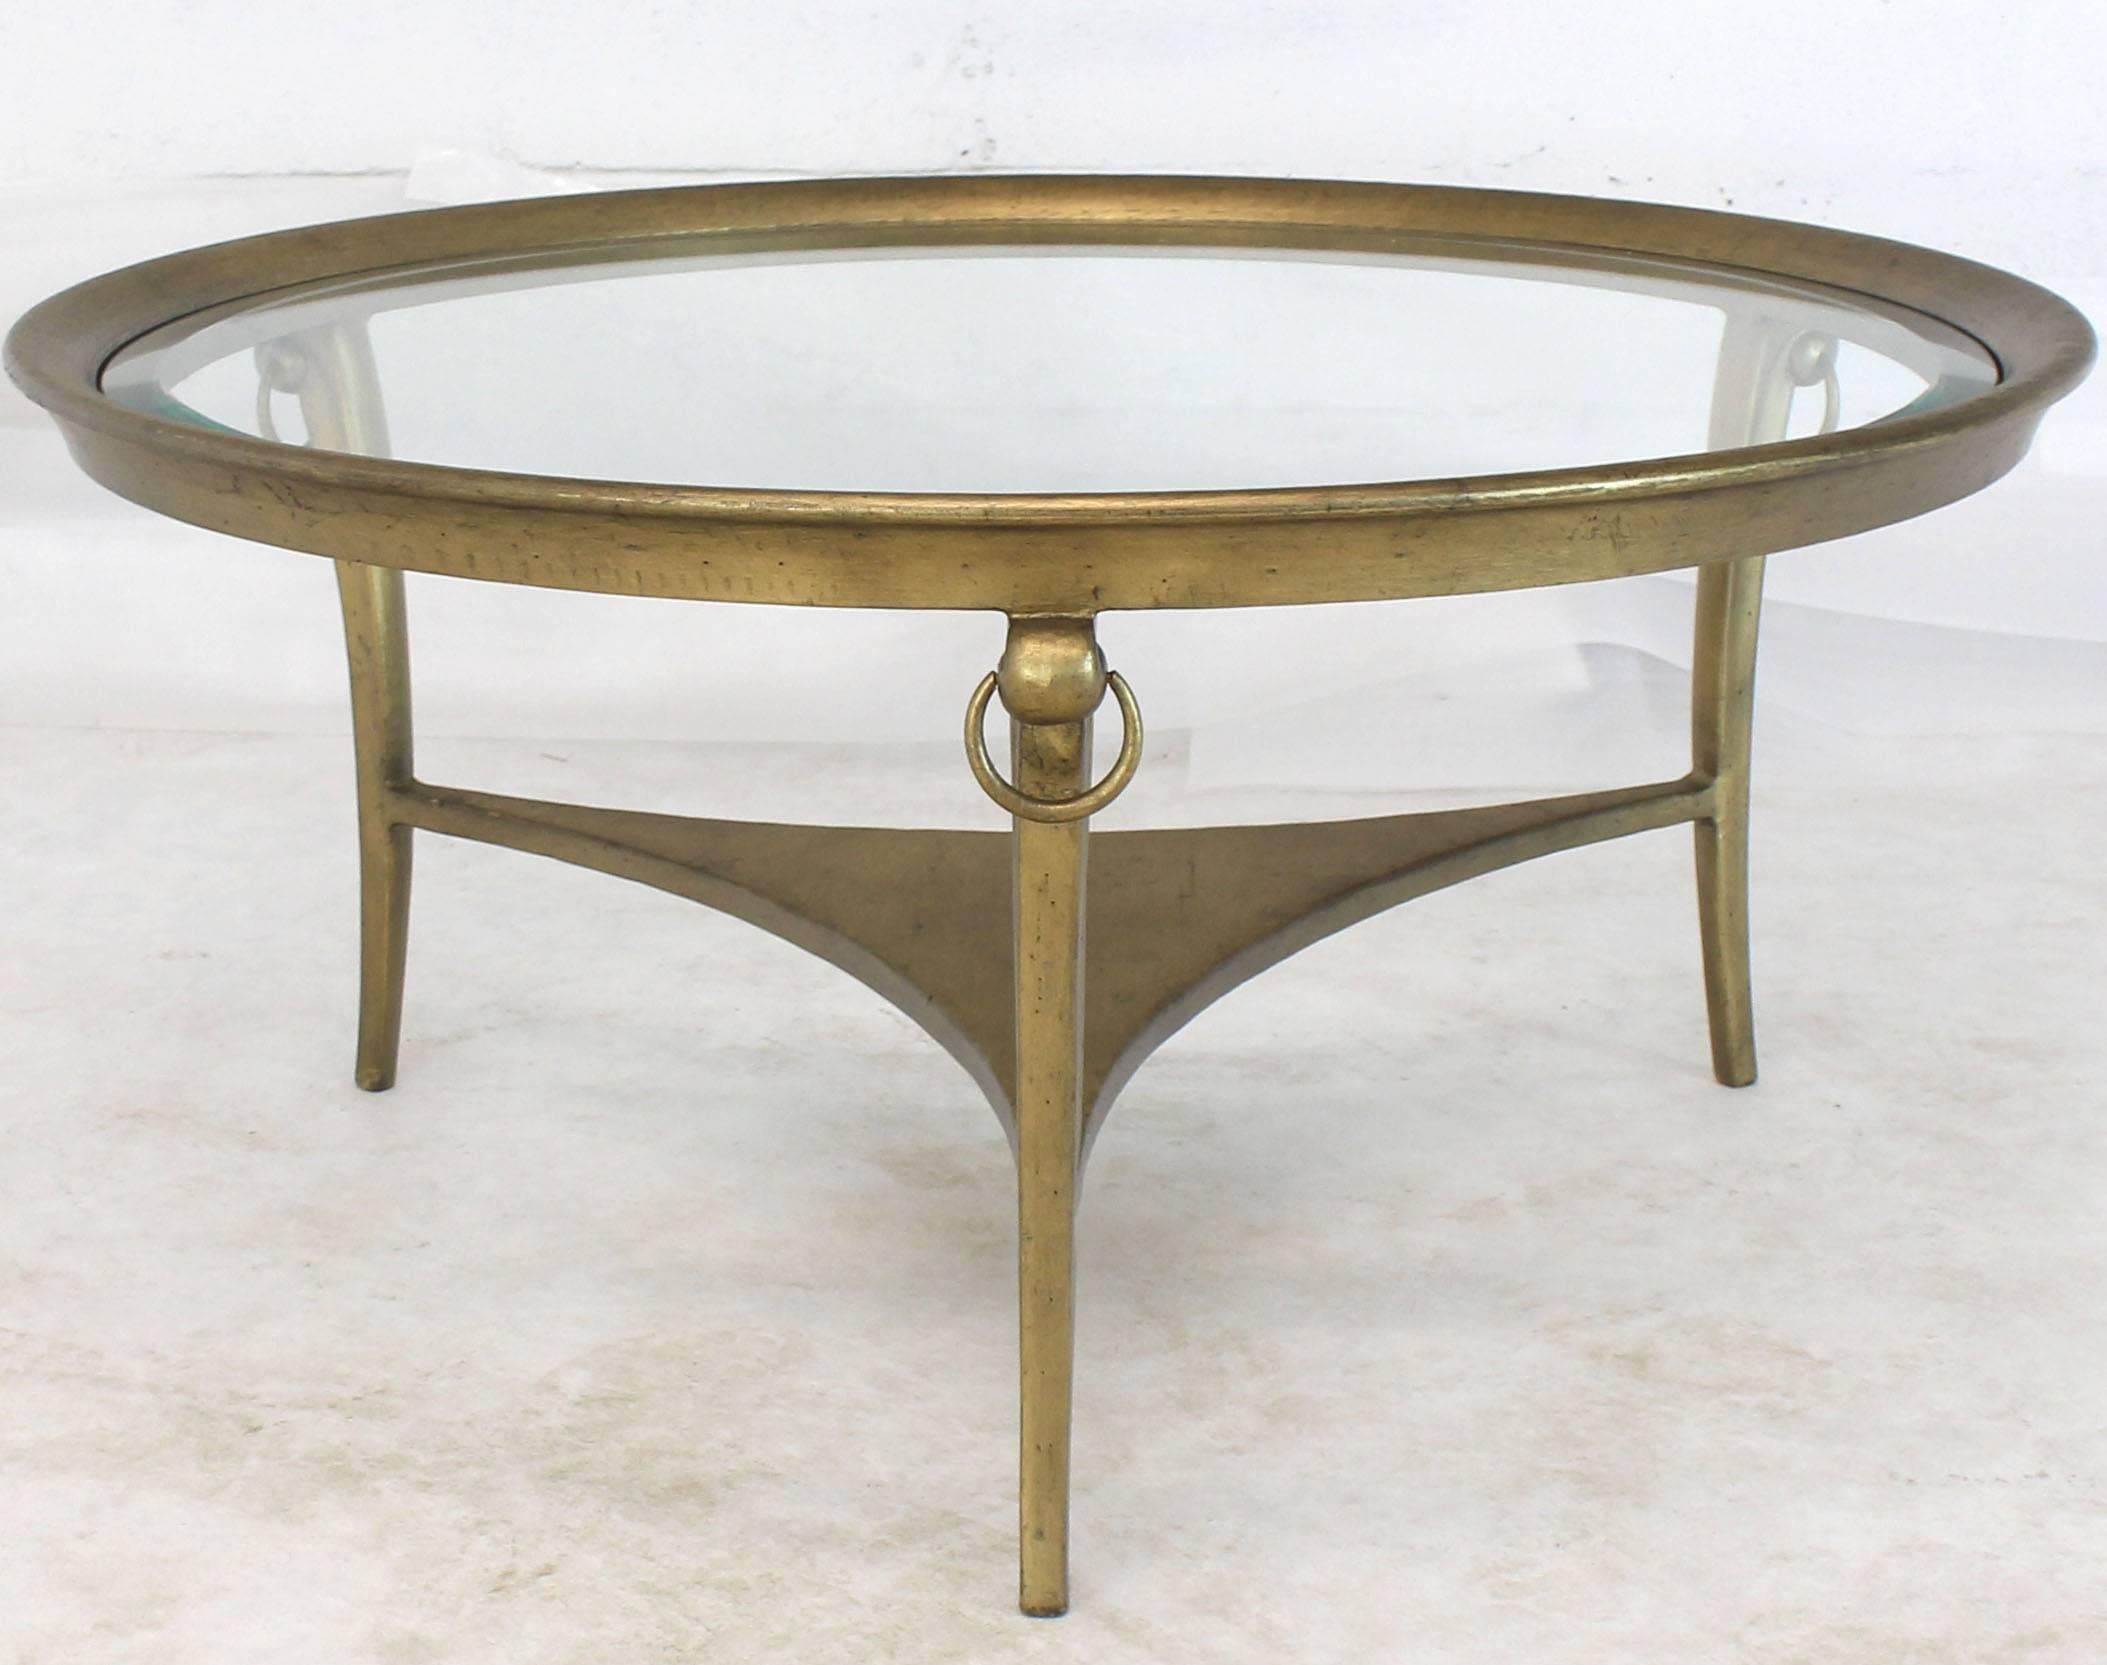 Solid painted metal iron base round glass top coffee table.